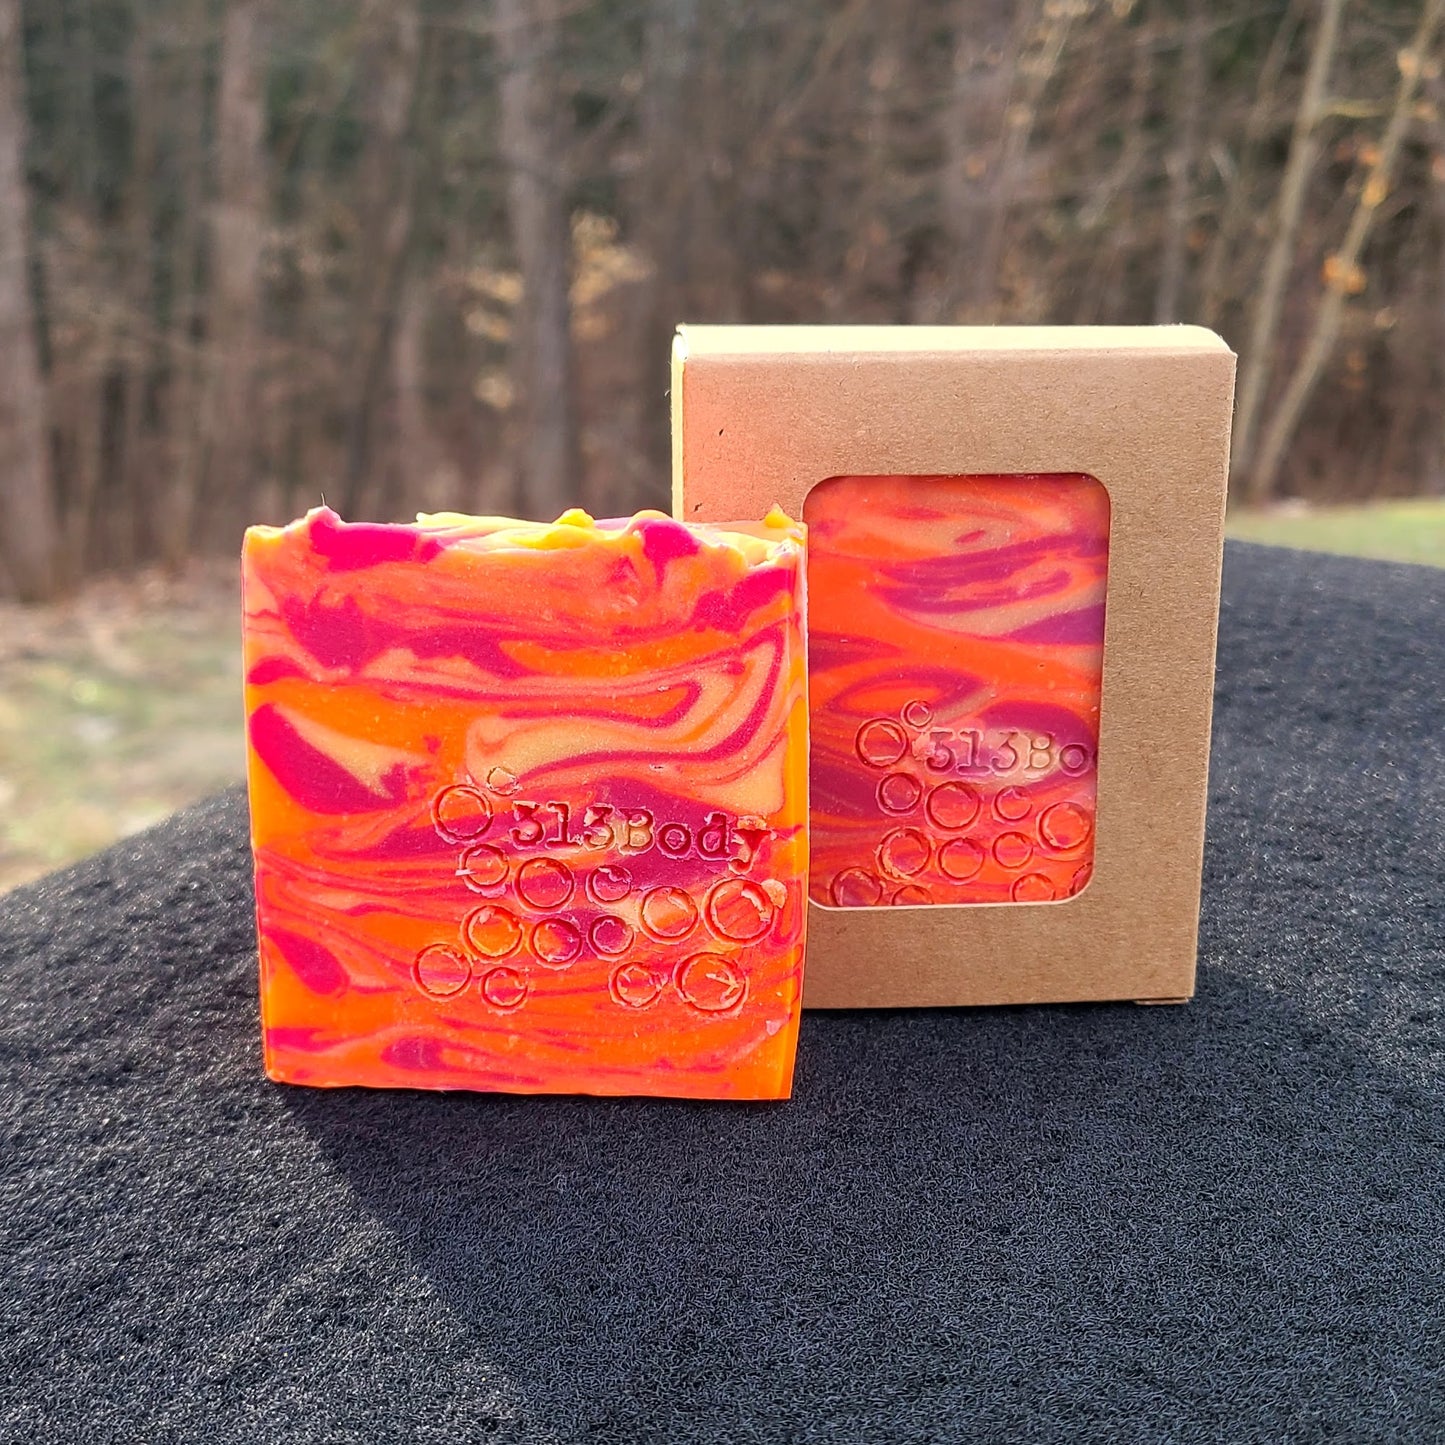 Lake Michigan Sunset ~ Hibiscus Palm Scented Handmade Soap with Goats Milk & Shea Butter